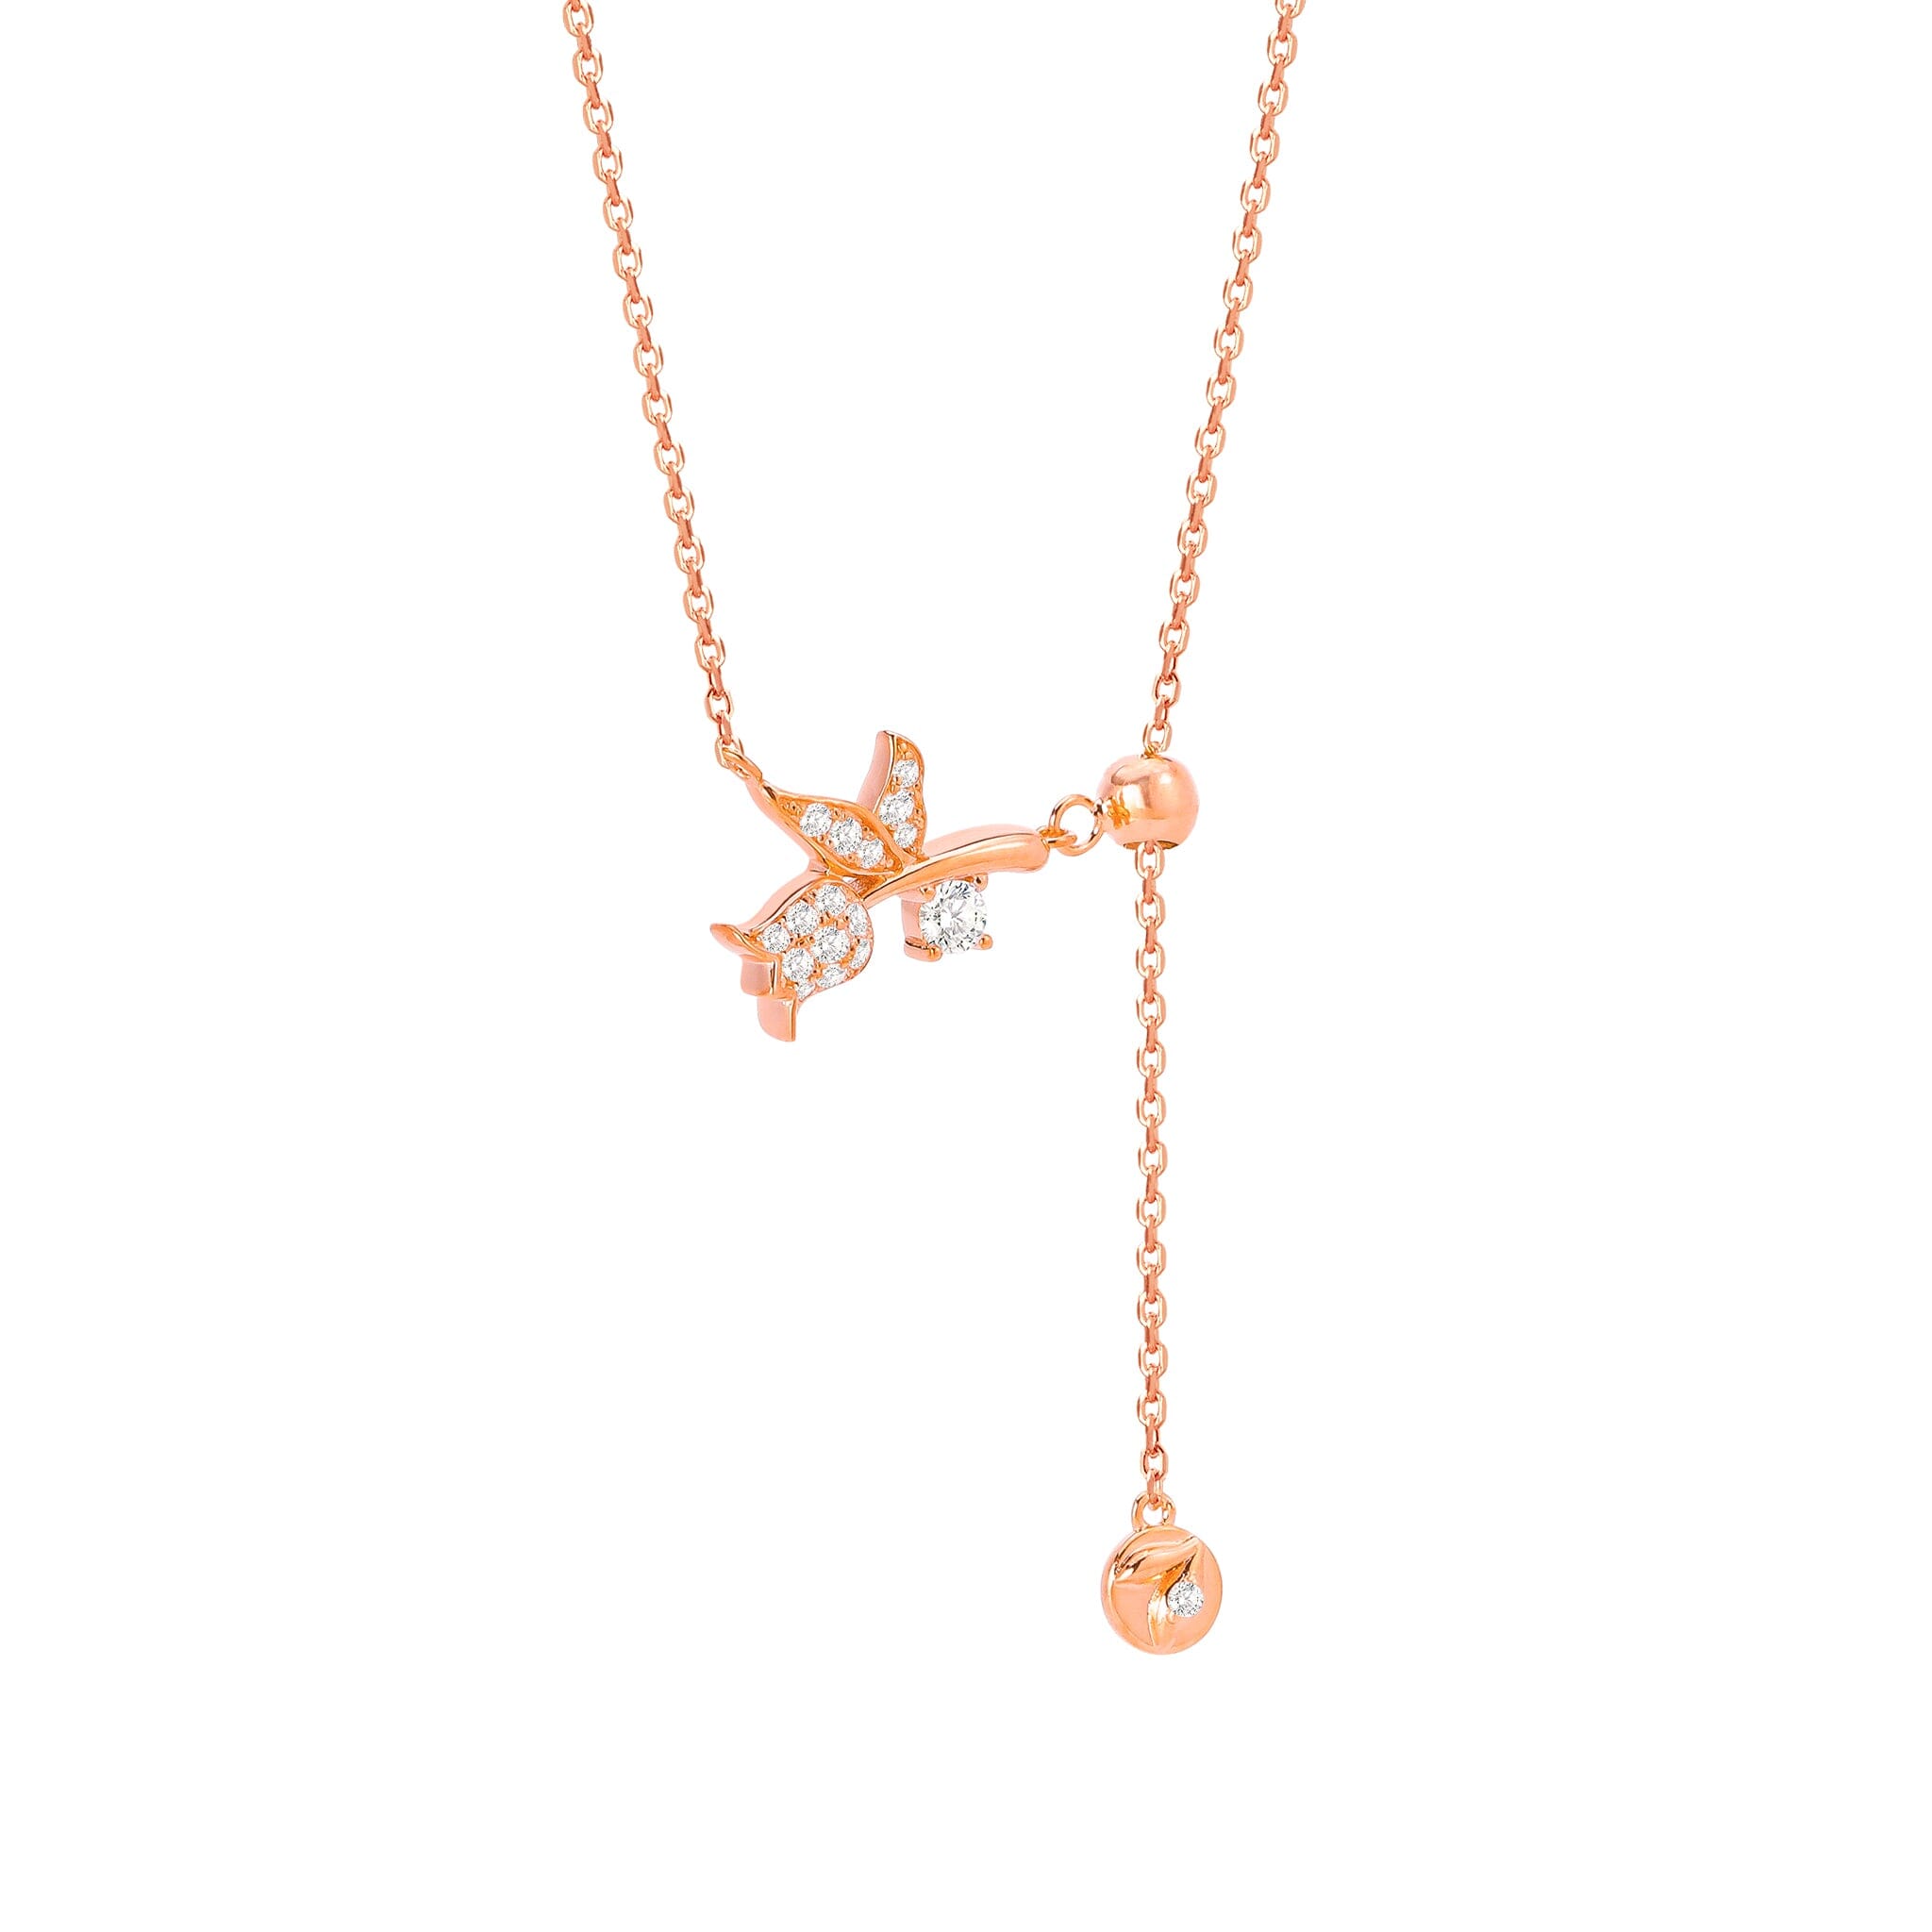 Women's Floral Sterling Silver Necklace Necklaces WAA FASHION GROUP Rose Gold Adjustable 